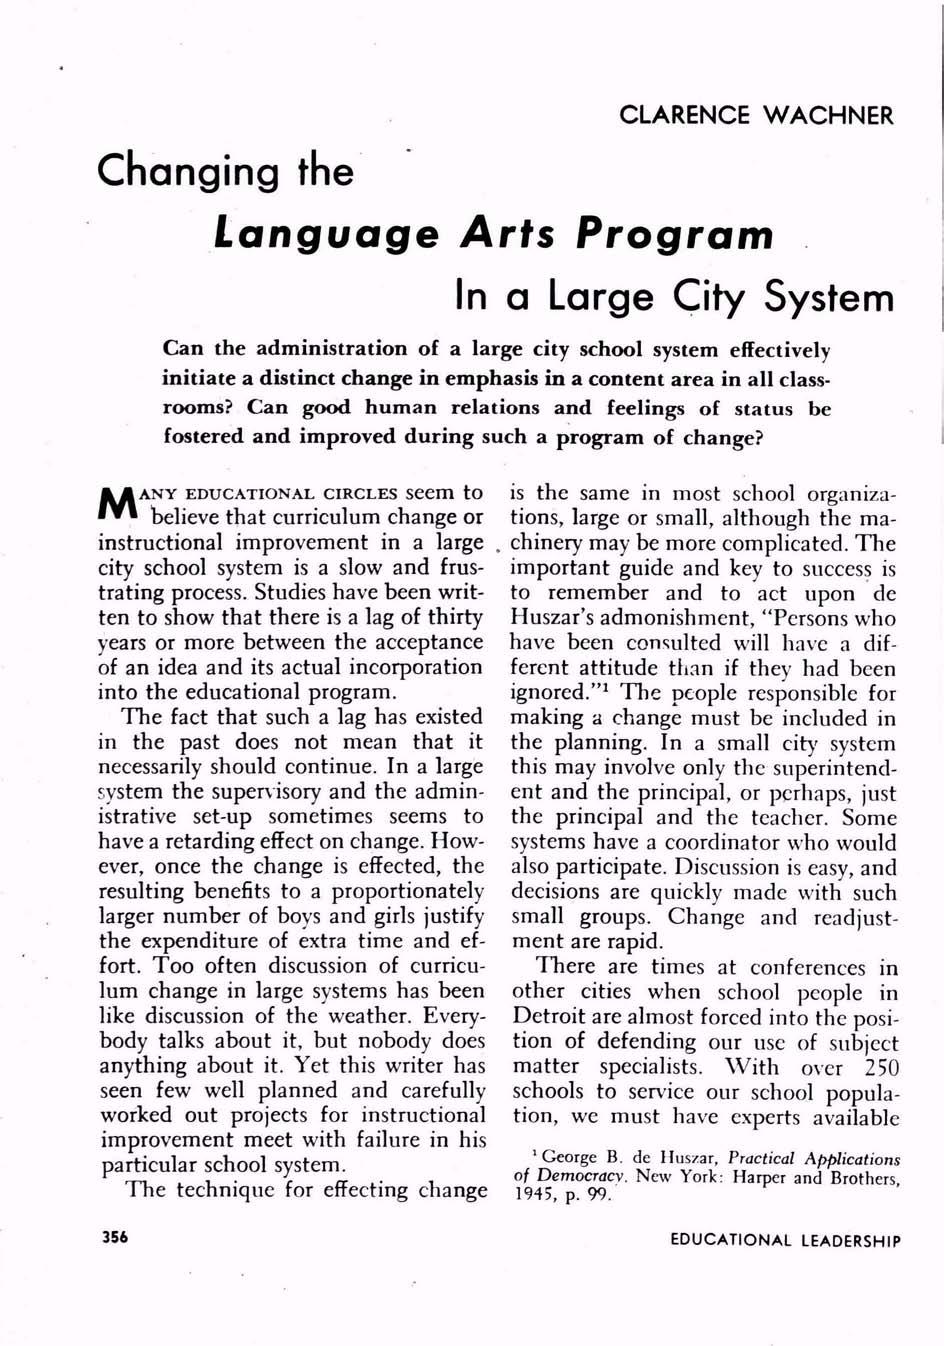 Language Arfs Program Can the administration of a large city school system effectively initiate a distinct change in emphasis in a content area in all class rooms?